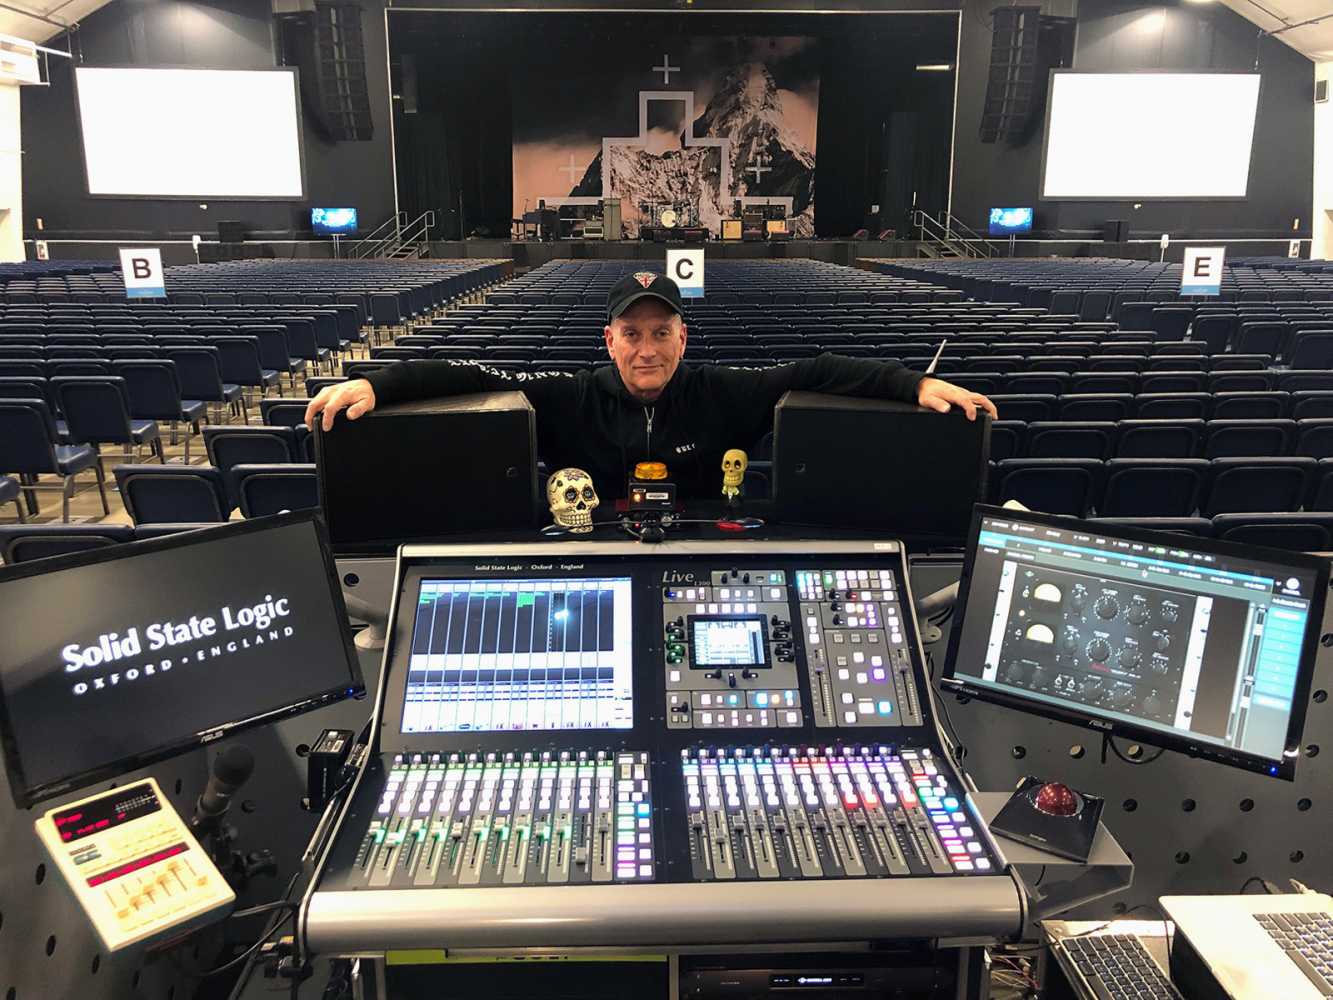 At FOH, Stephen McGuire is working from an SSL L300.